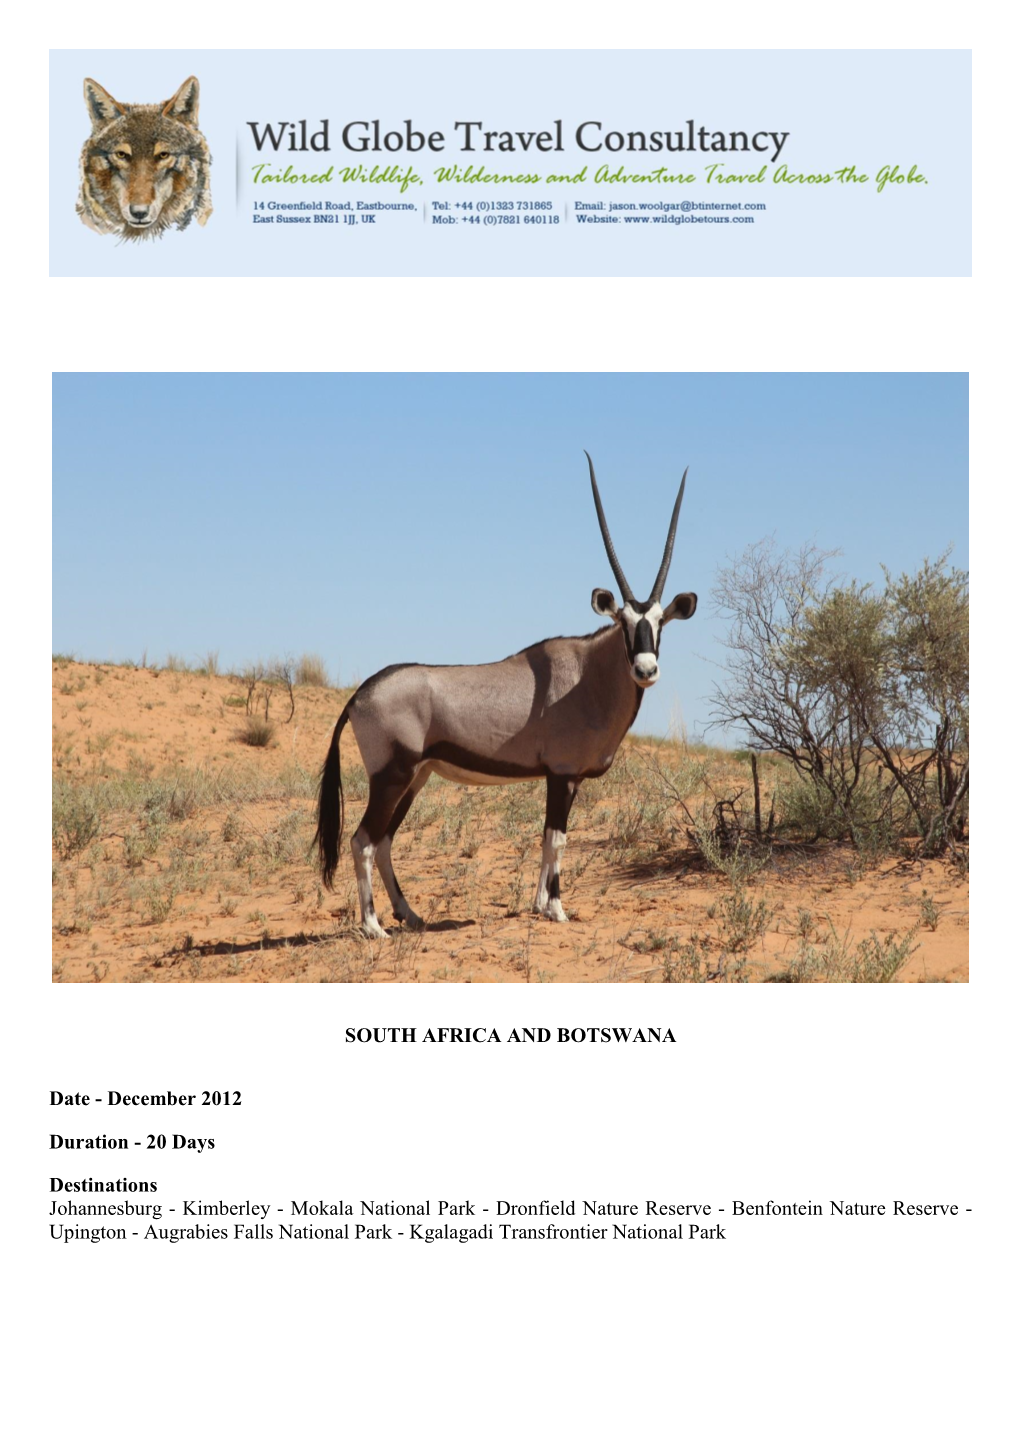 15) South Africa and Botswana – December 2012